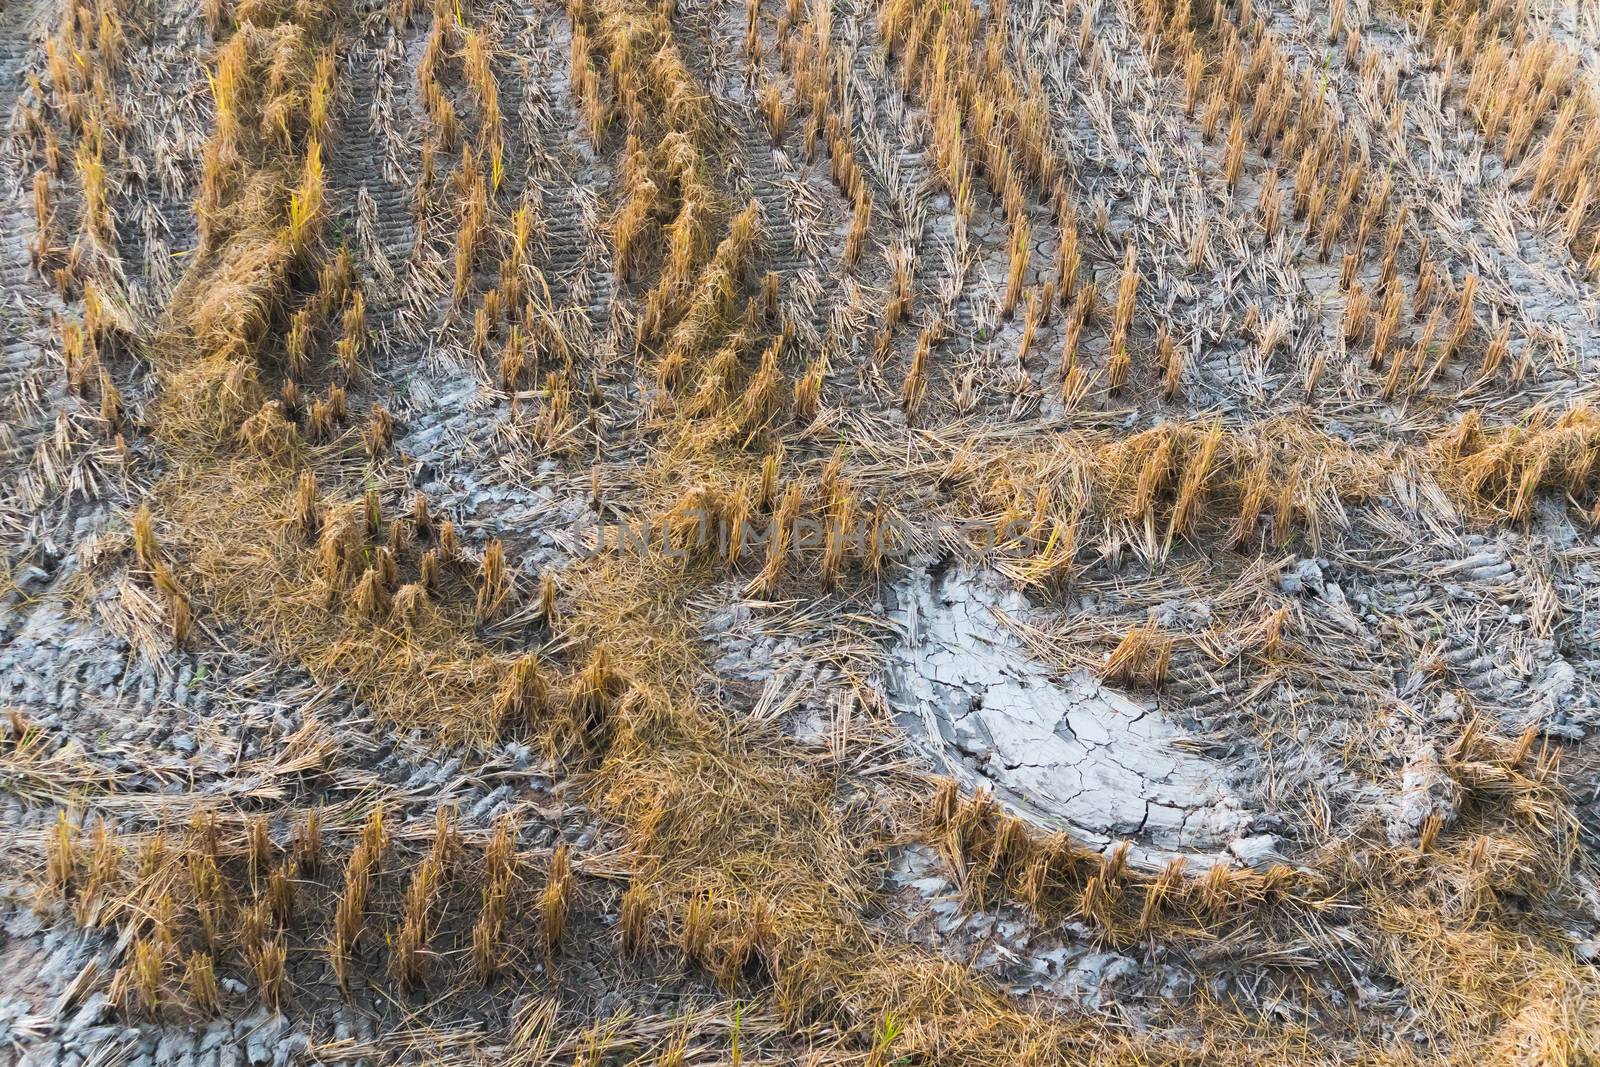 Rice fields with dry cracked ground looking from above